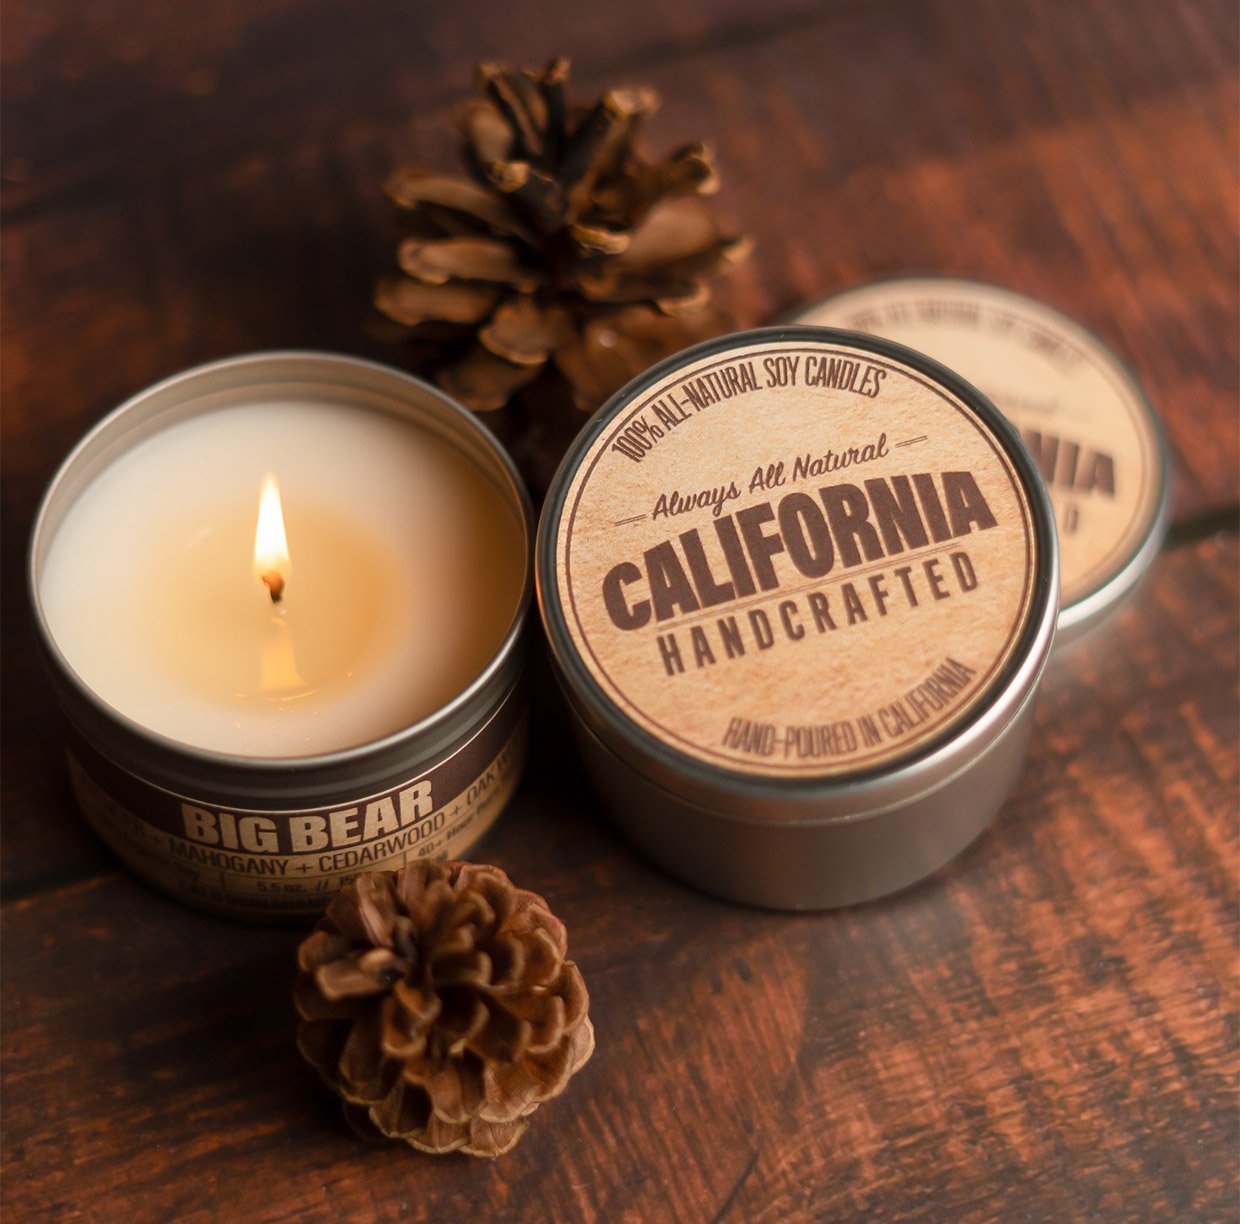 California Handcrafted Candles